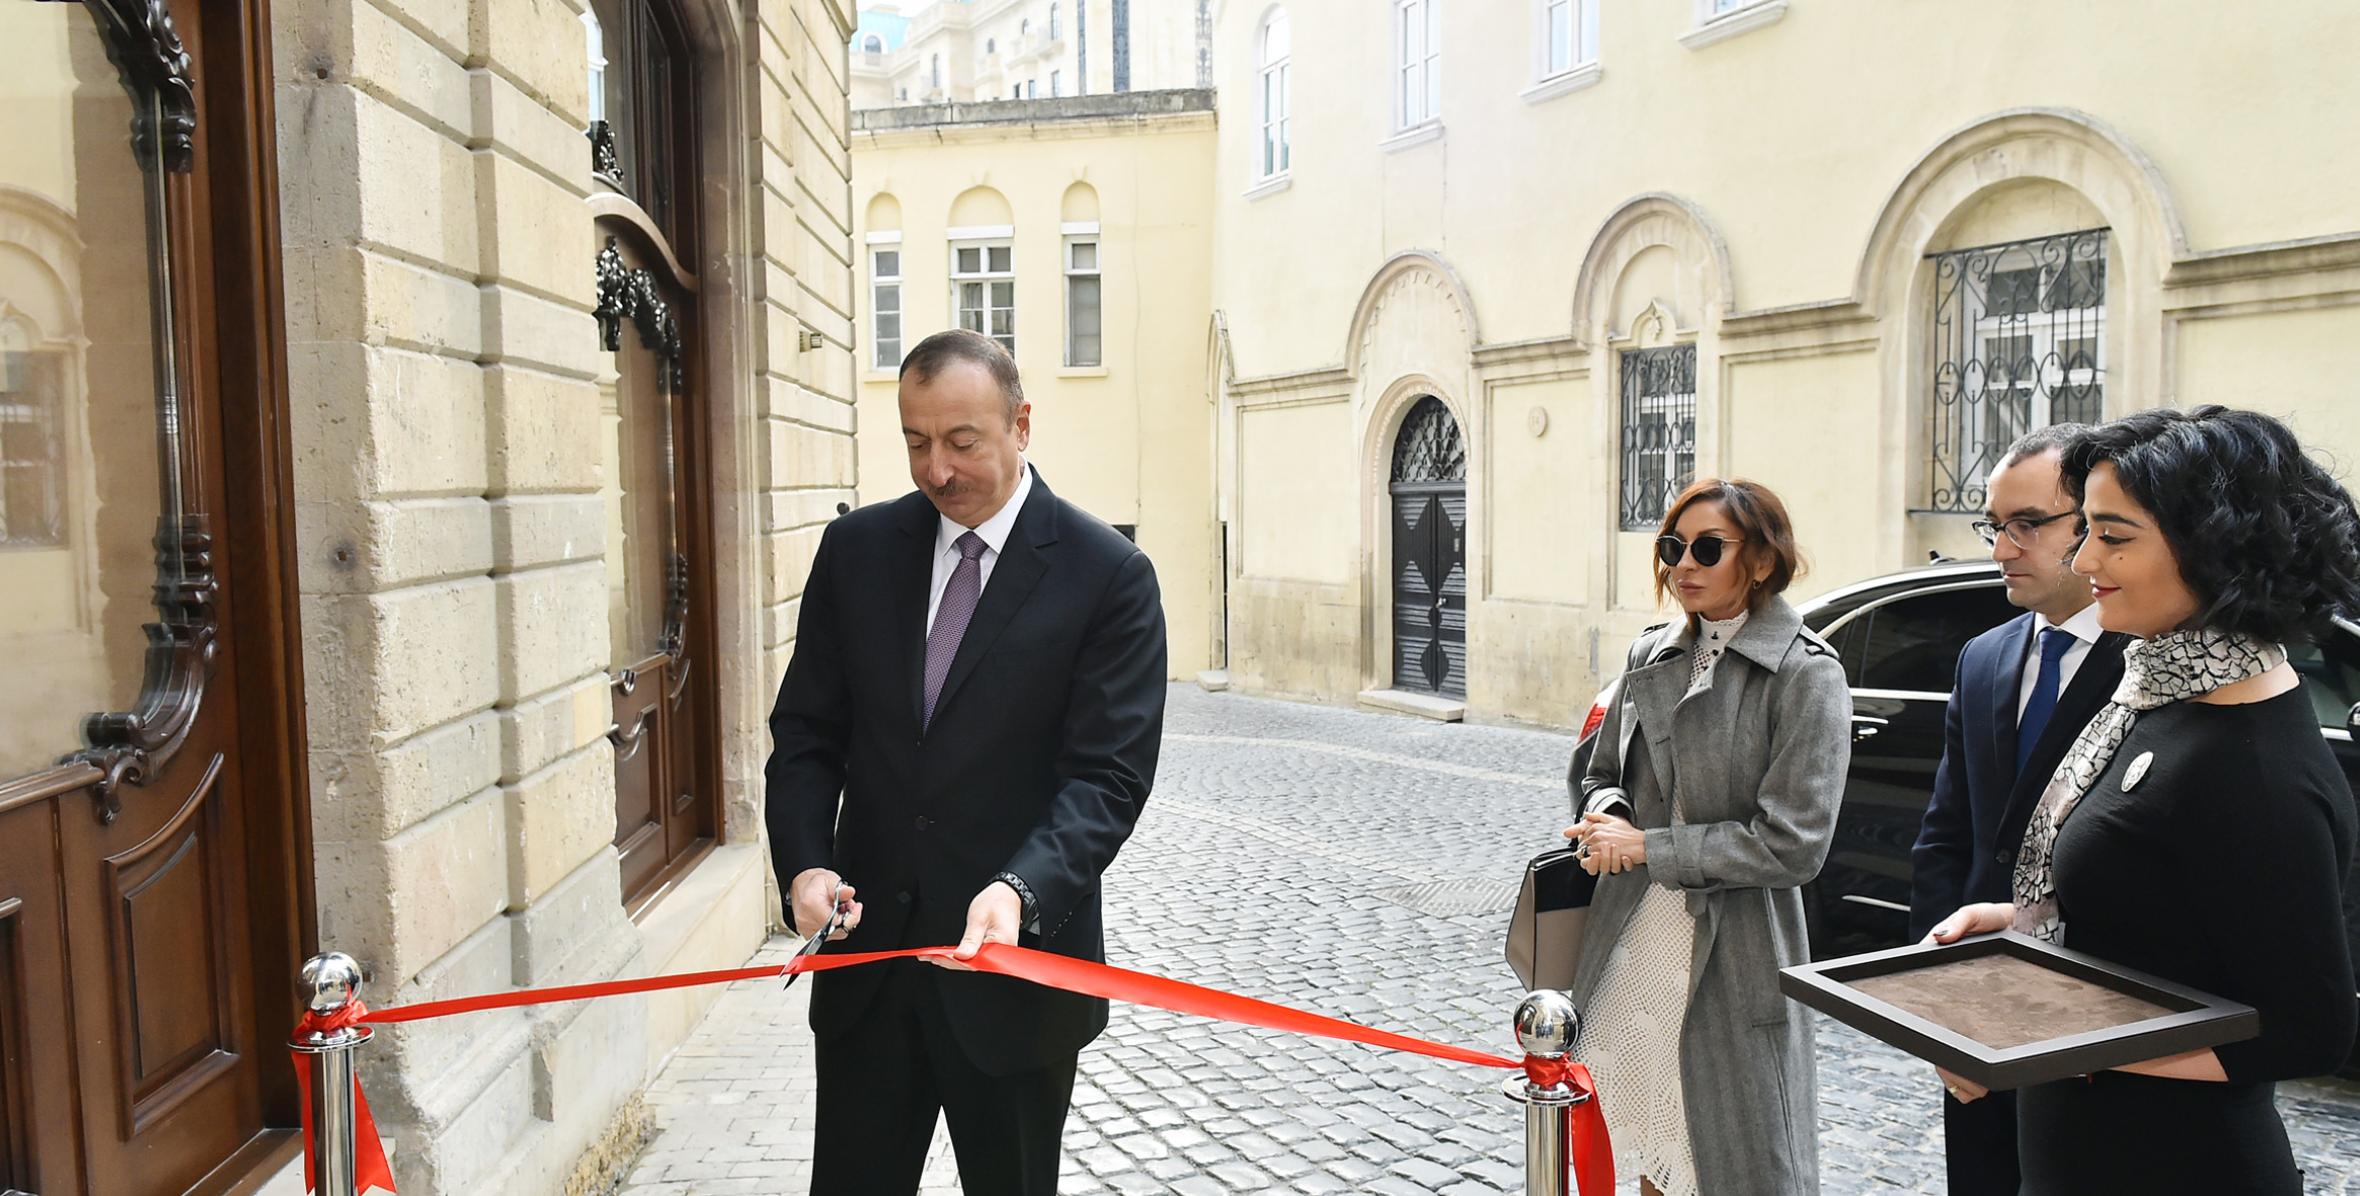 Ilham Aliyev attended opening of Marionette Theatre